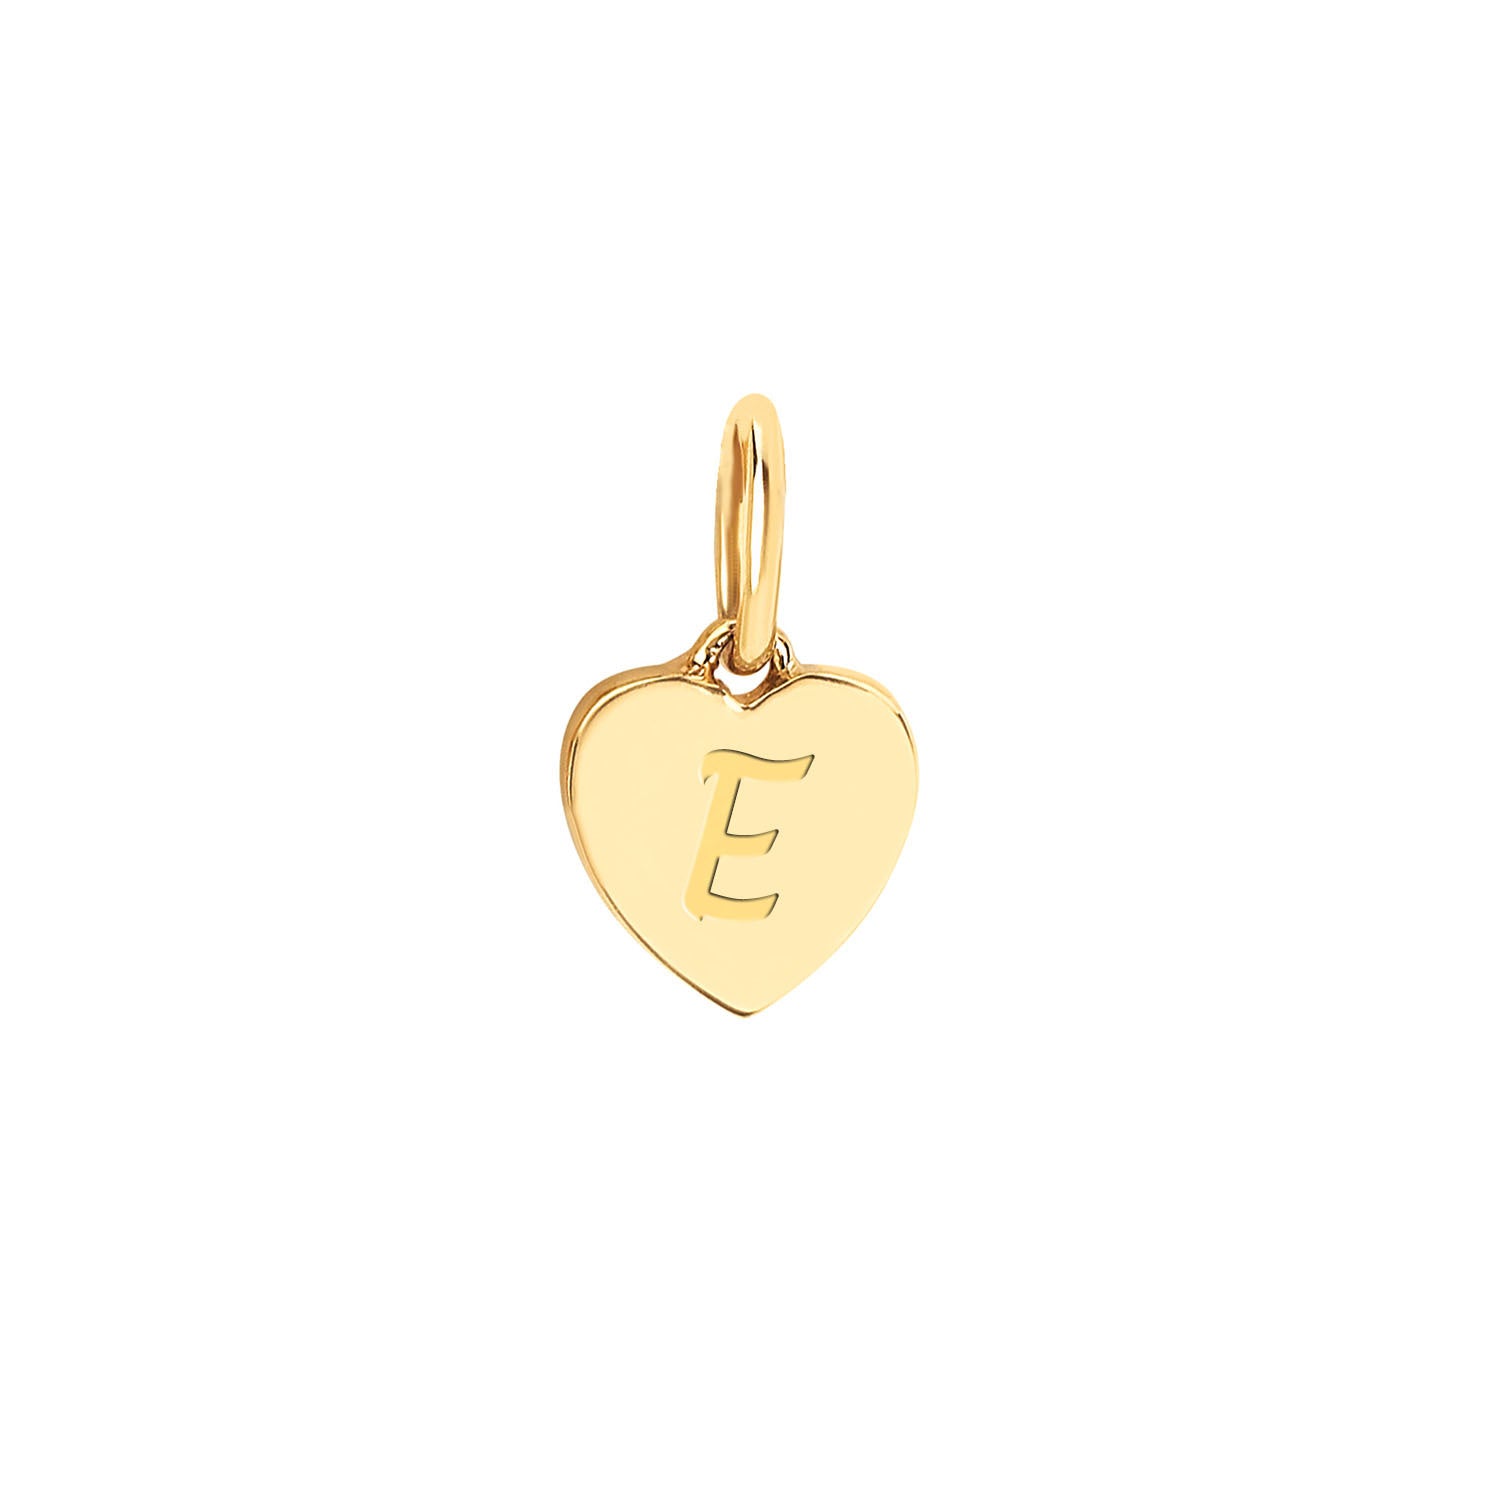 Gold Heart Necklace Charm in 14k yellow gold with script engraving of initial E